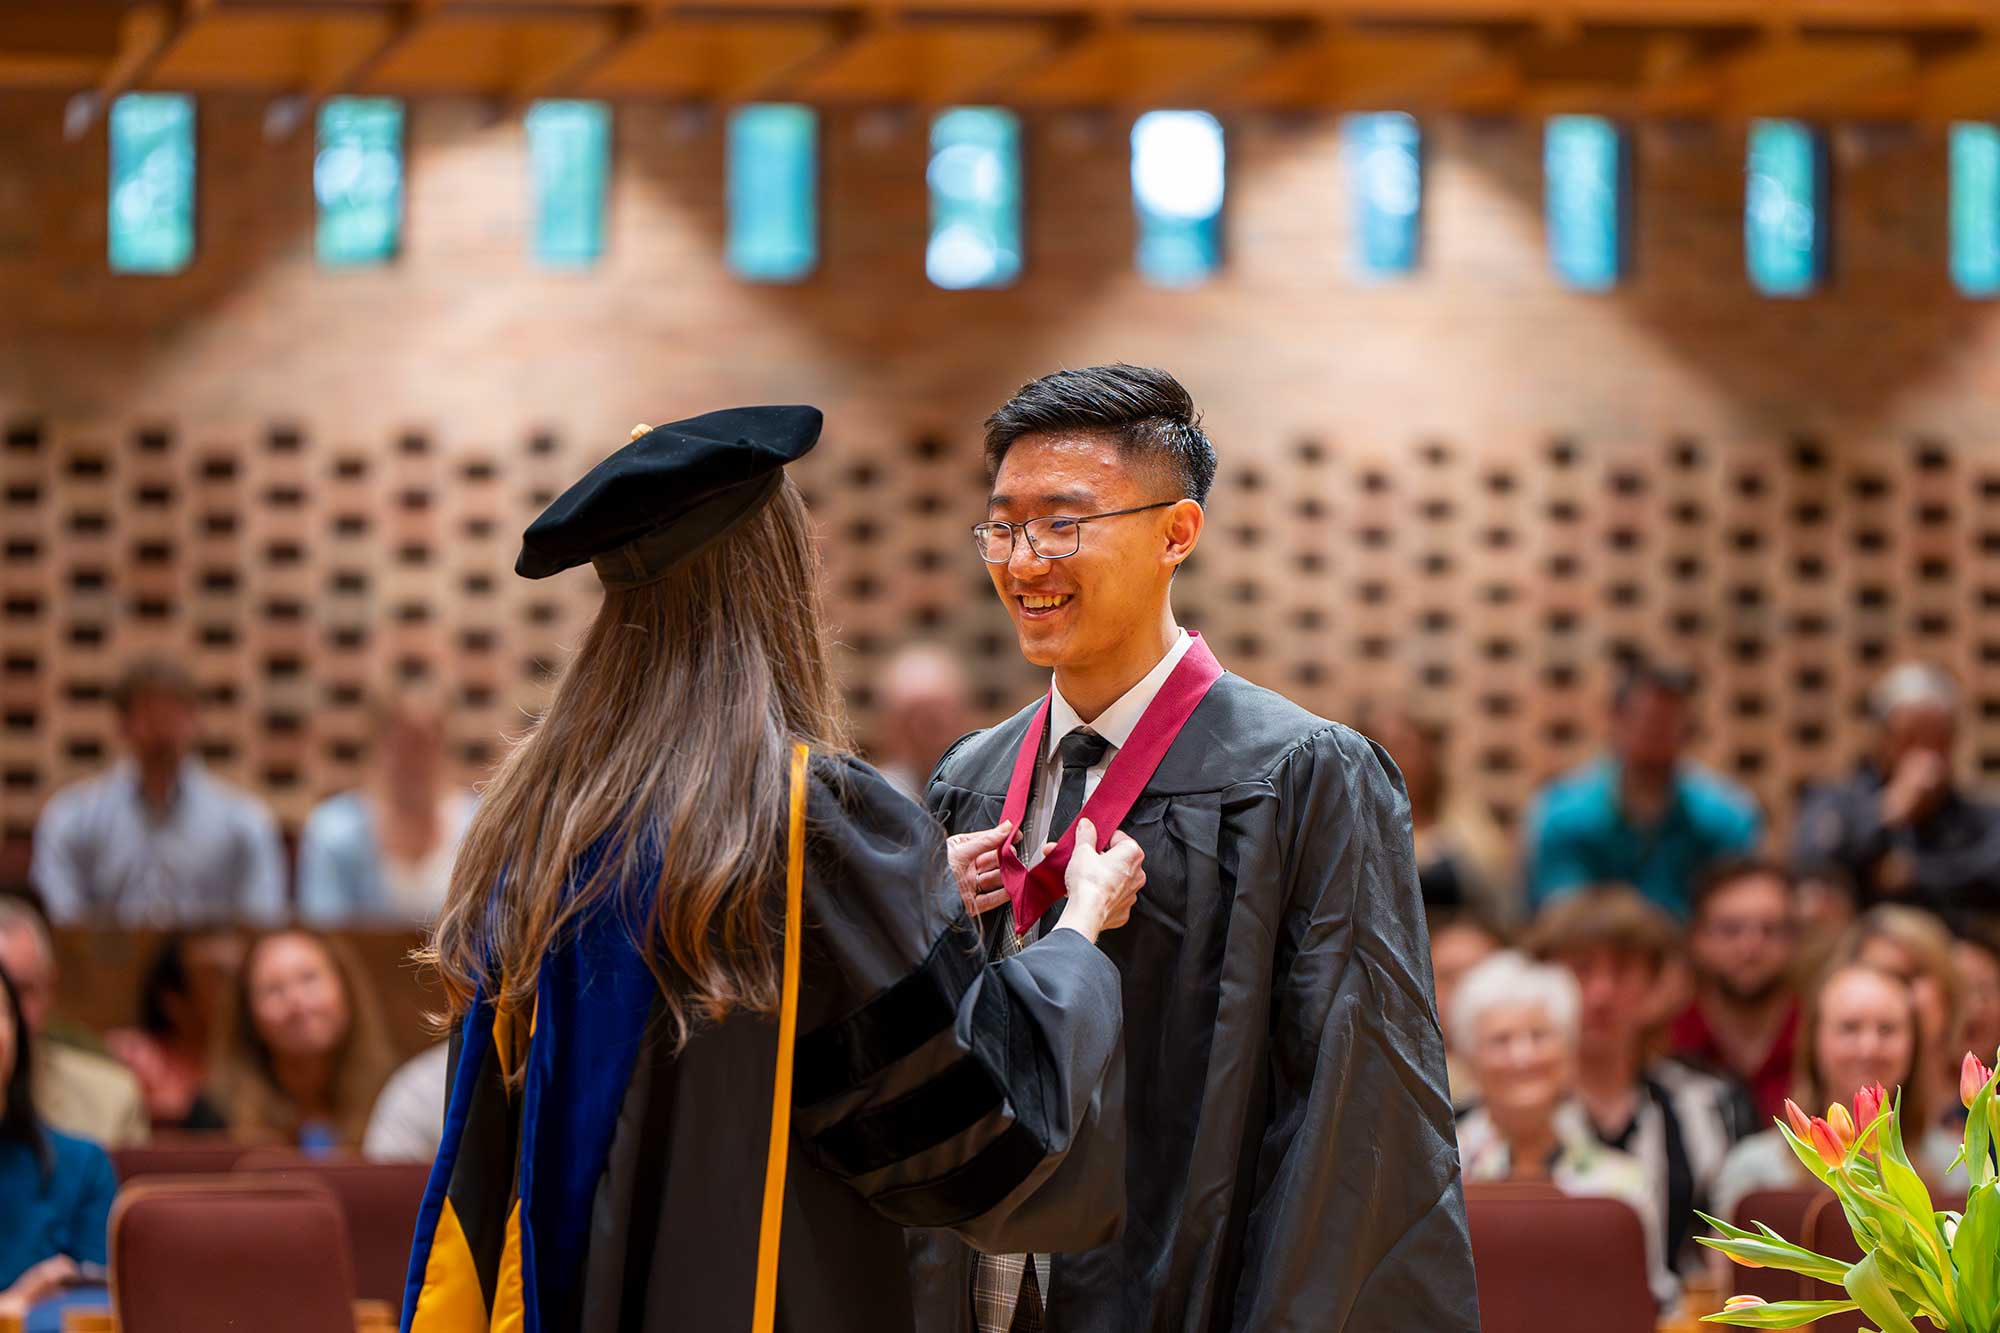 A professor places a medal around an honors graduate's neck at honors convocation.